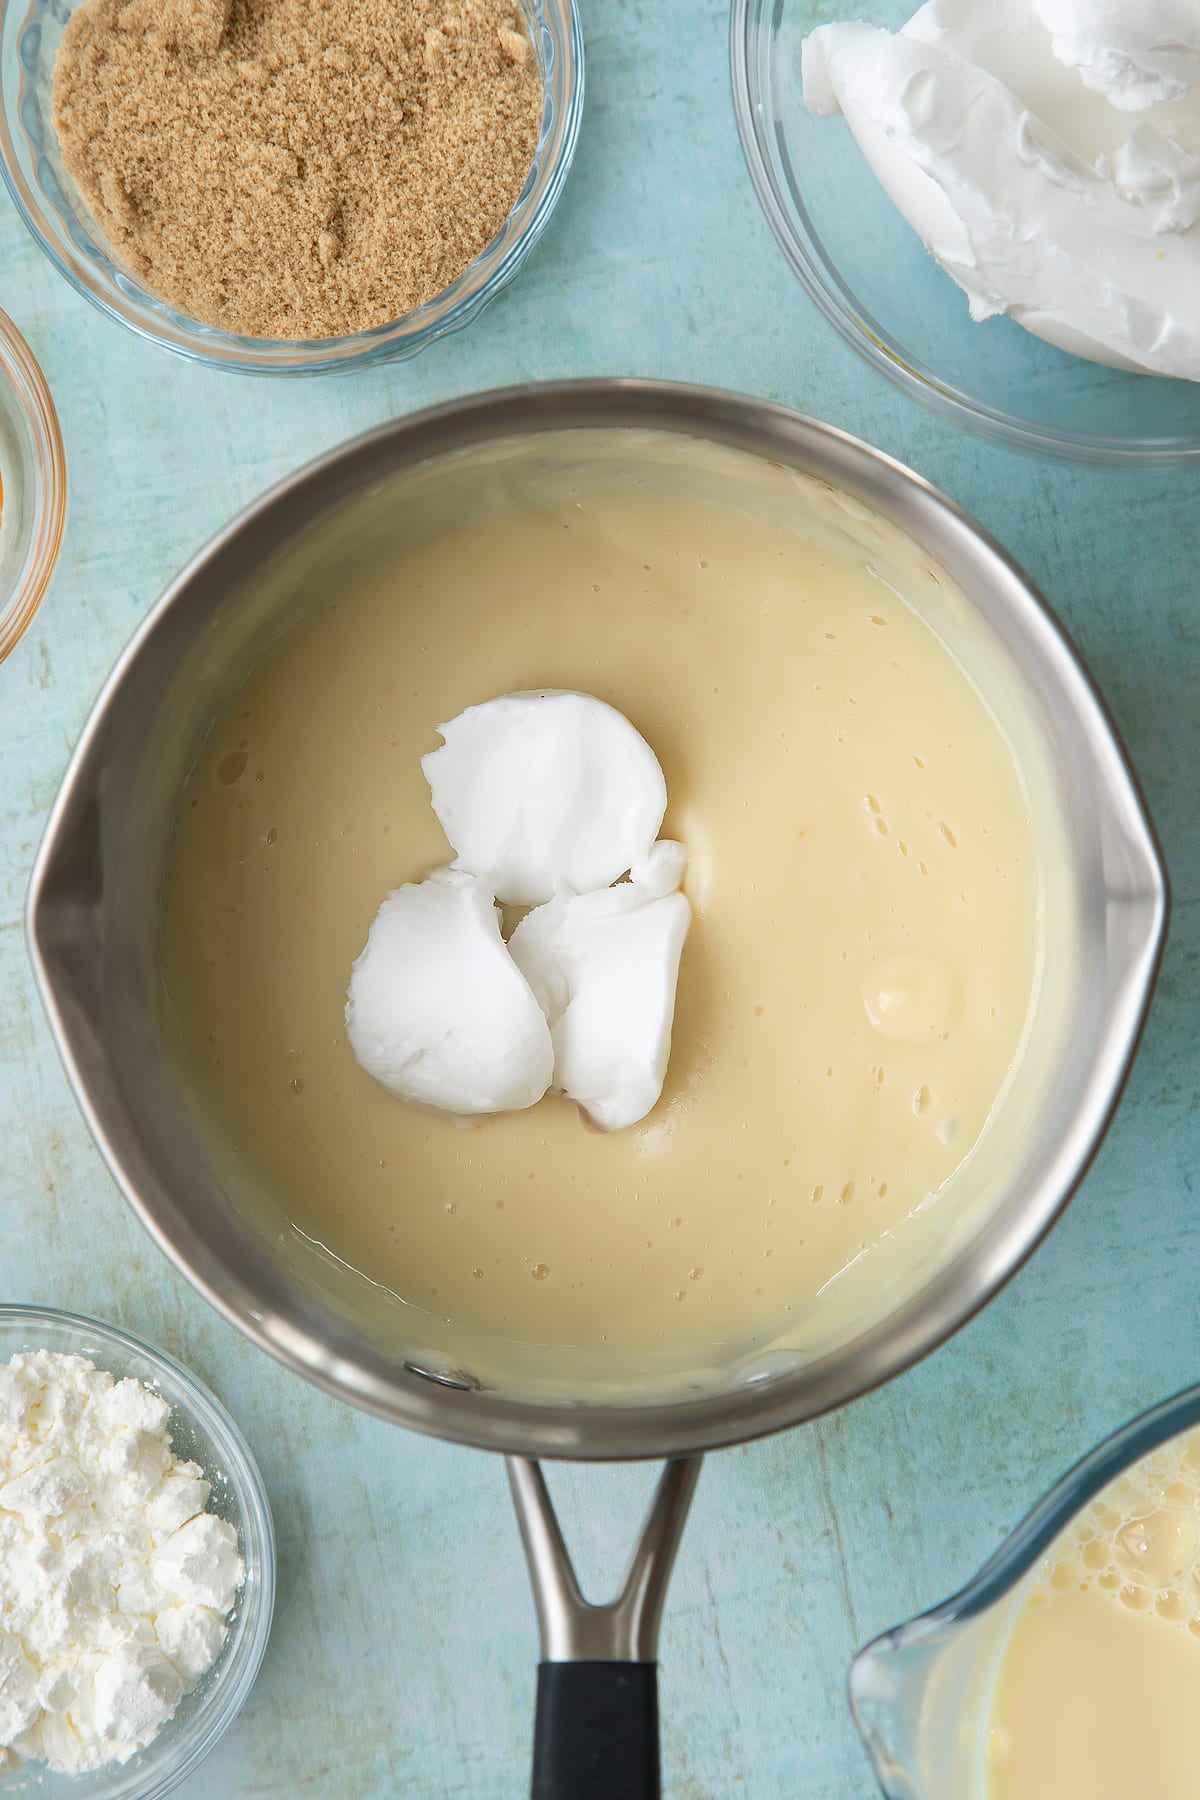 Soya milk, vanilla, sugar and cornflour thickened together in a pan with vegan cream cheese on top. Ingredients to make vegan custard surround the pan.